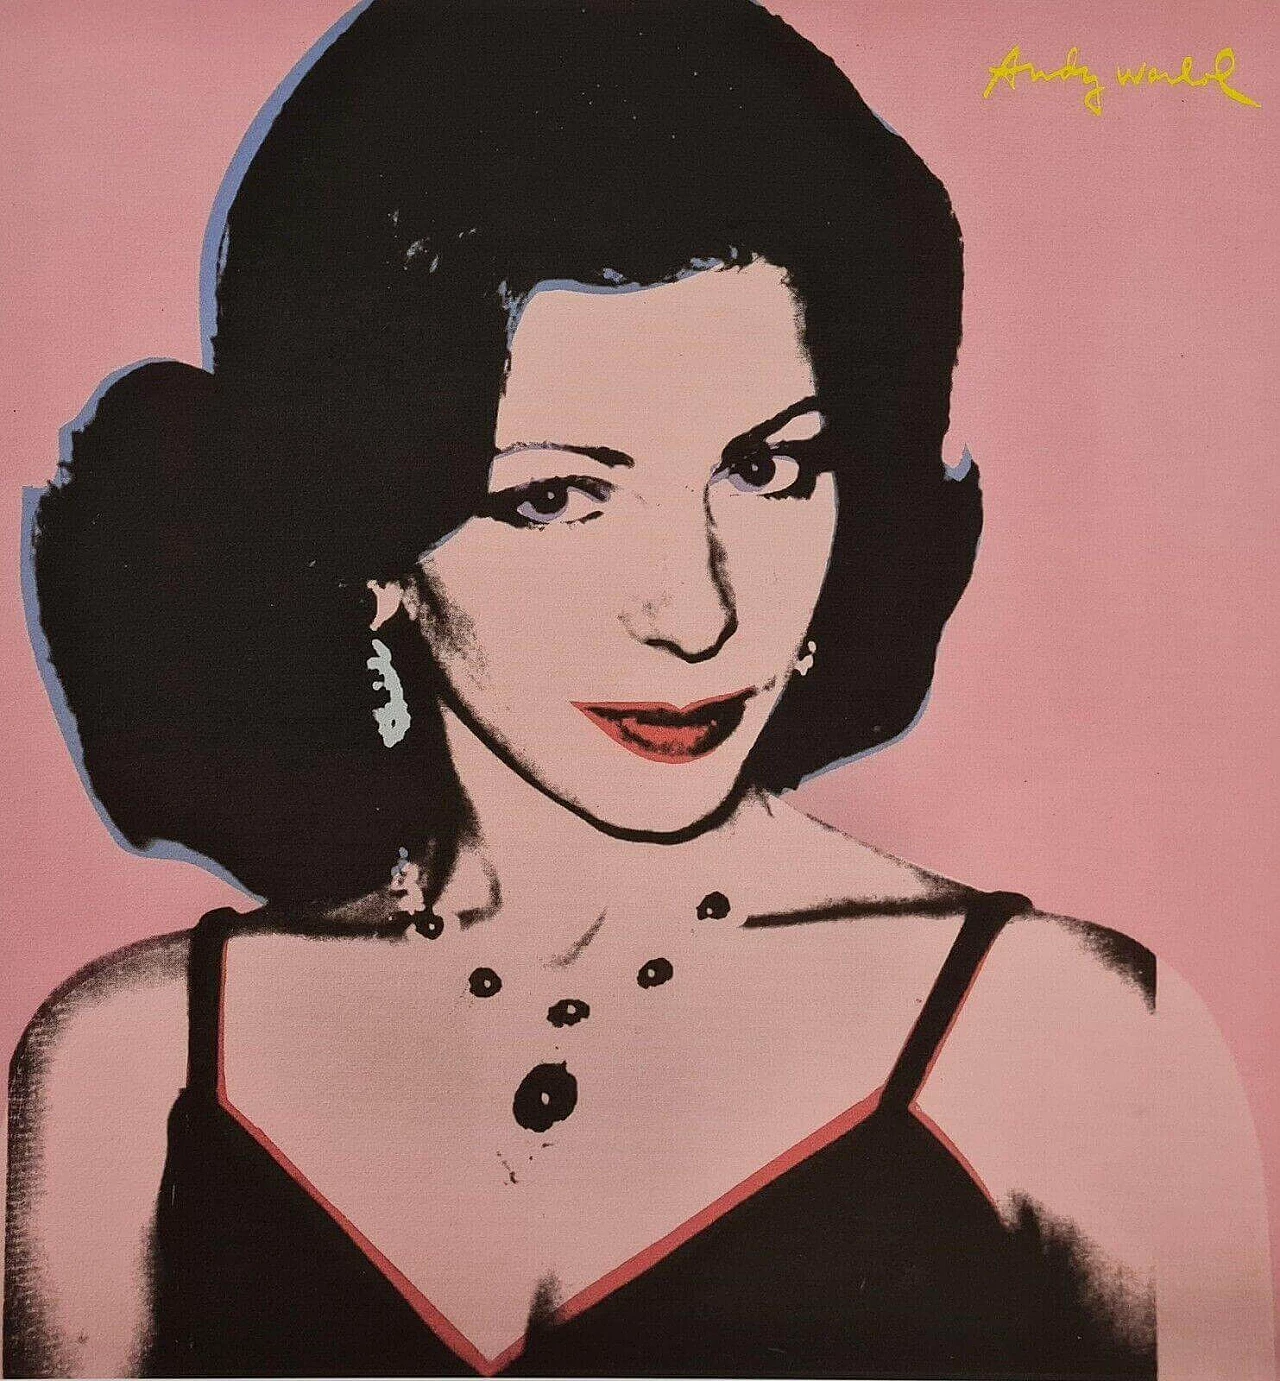 Female portrait, lithography, reproduction after Andy Warhol, 1980s 2